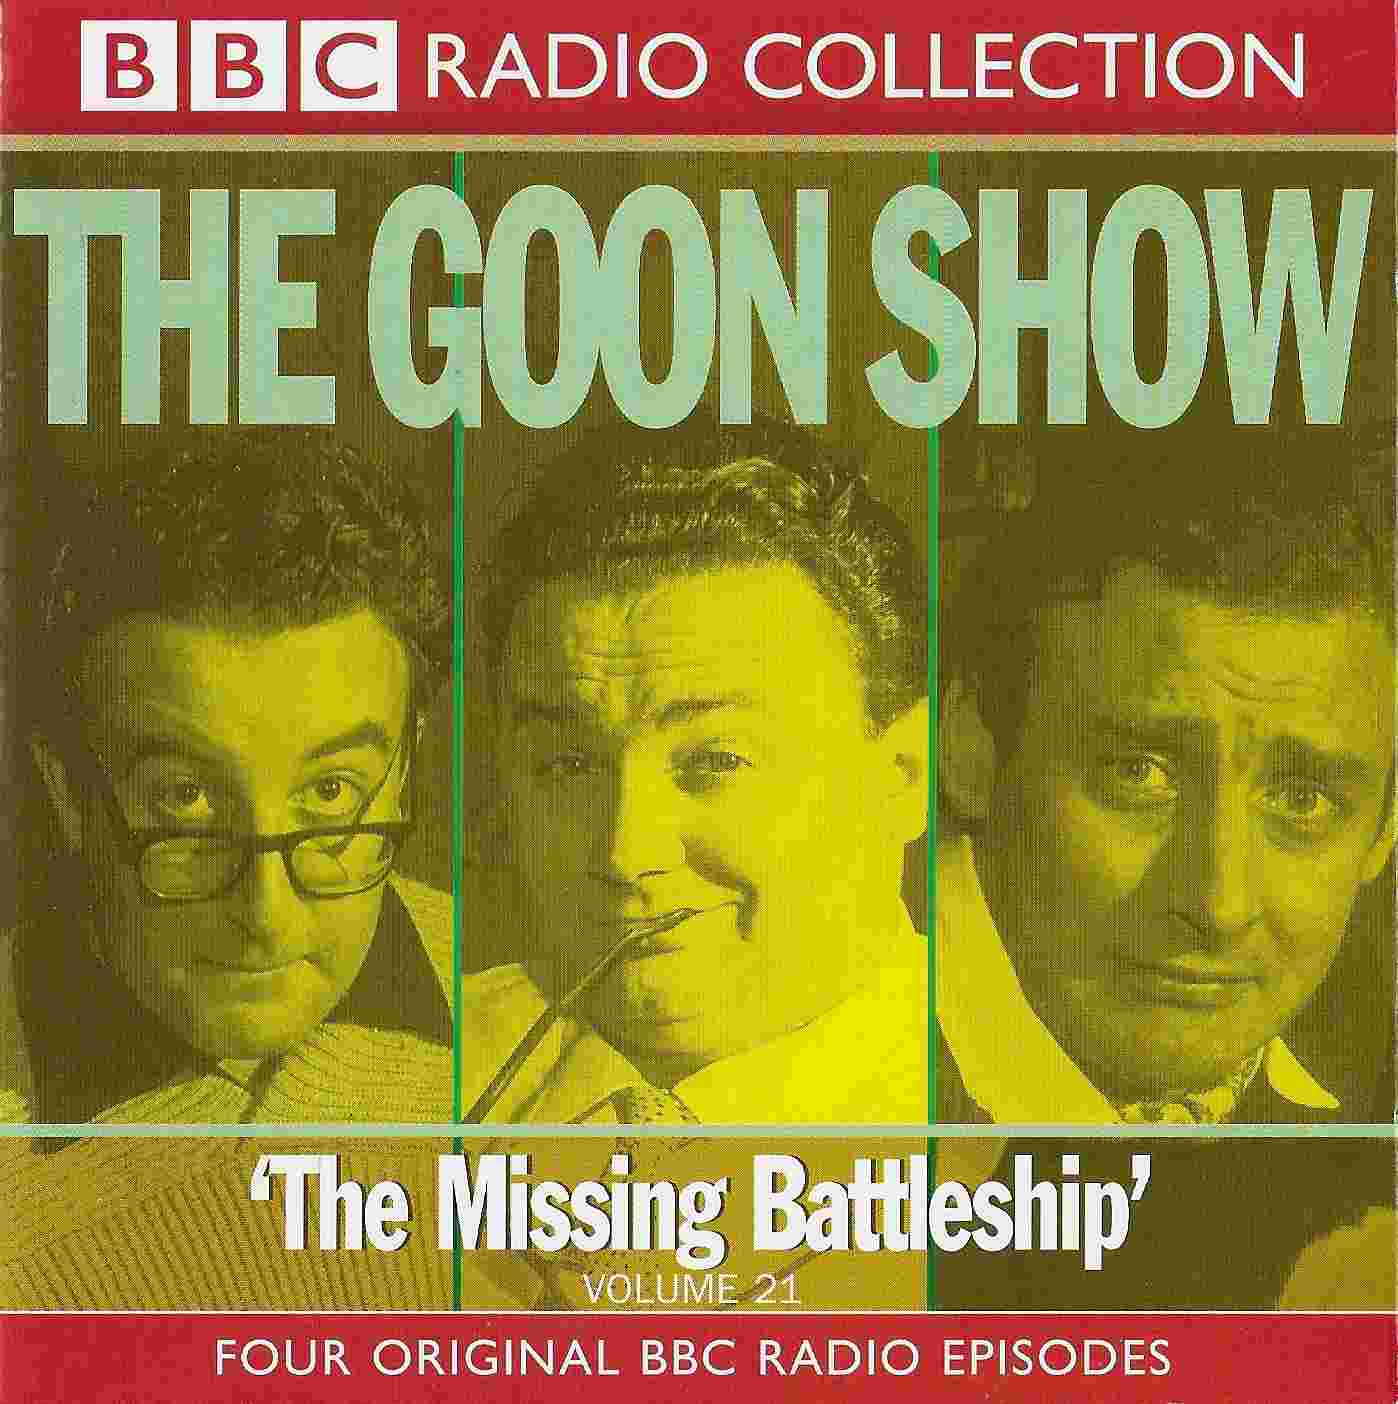 Picture of The Goon show 21 - The missing battleship by artist Spike Milligan / Larry Stephens from the BBC cds - Records and Tapes library